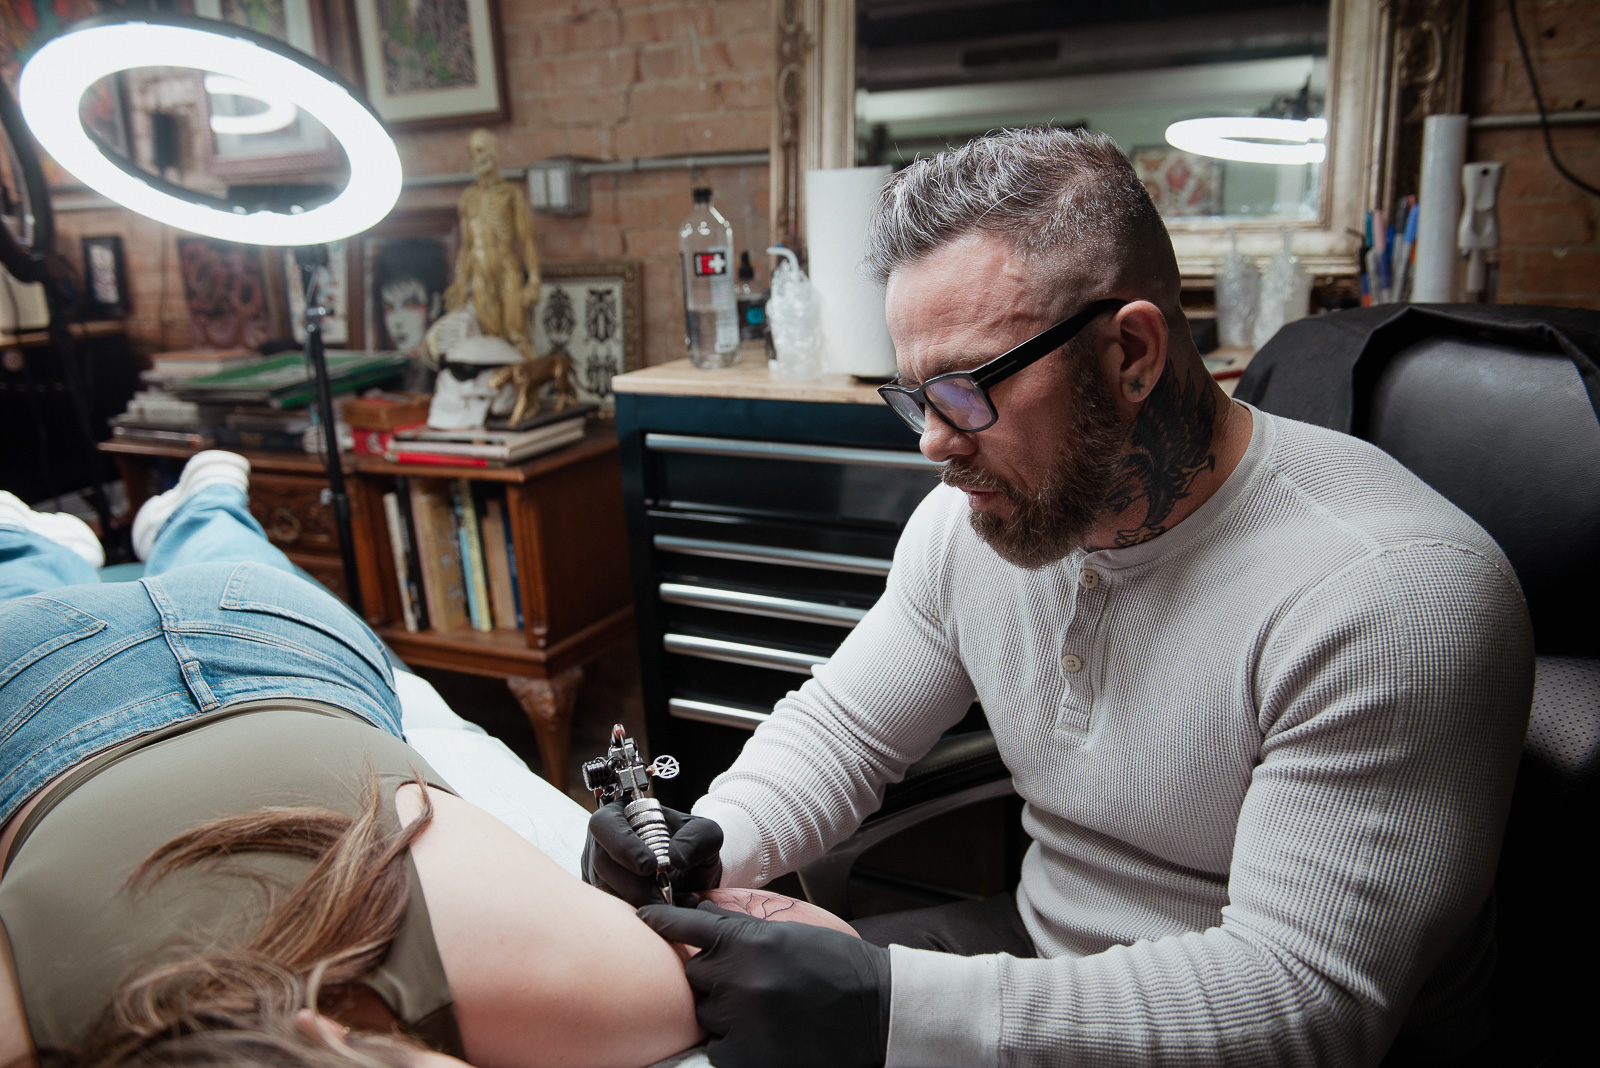 Legend Tattoo shop owner Patrick Carmack has been tattooing for nearly 30 years. He opened the Plano shop after operating in Austin under the same name. Photography Lauren Allen